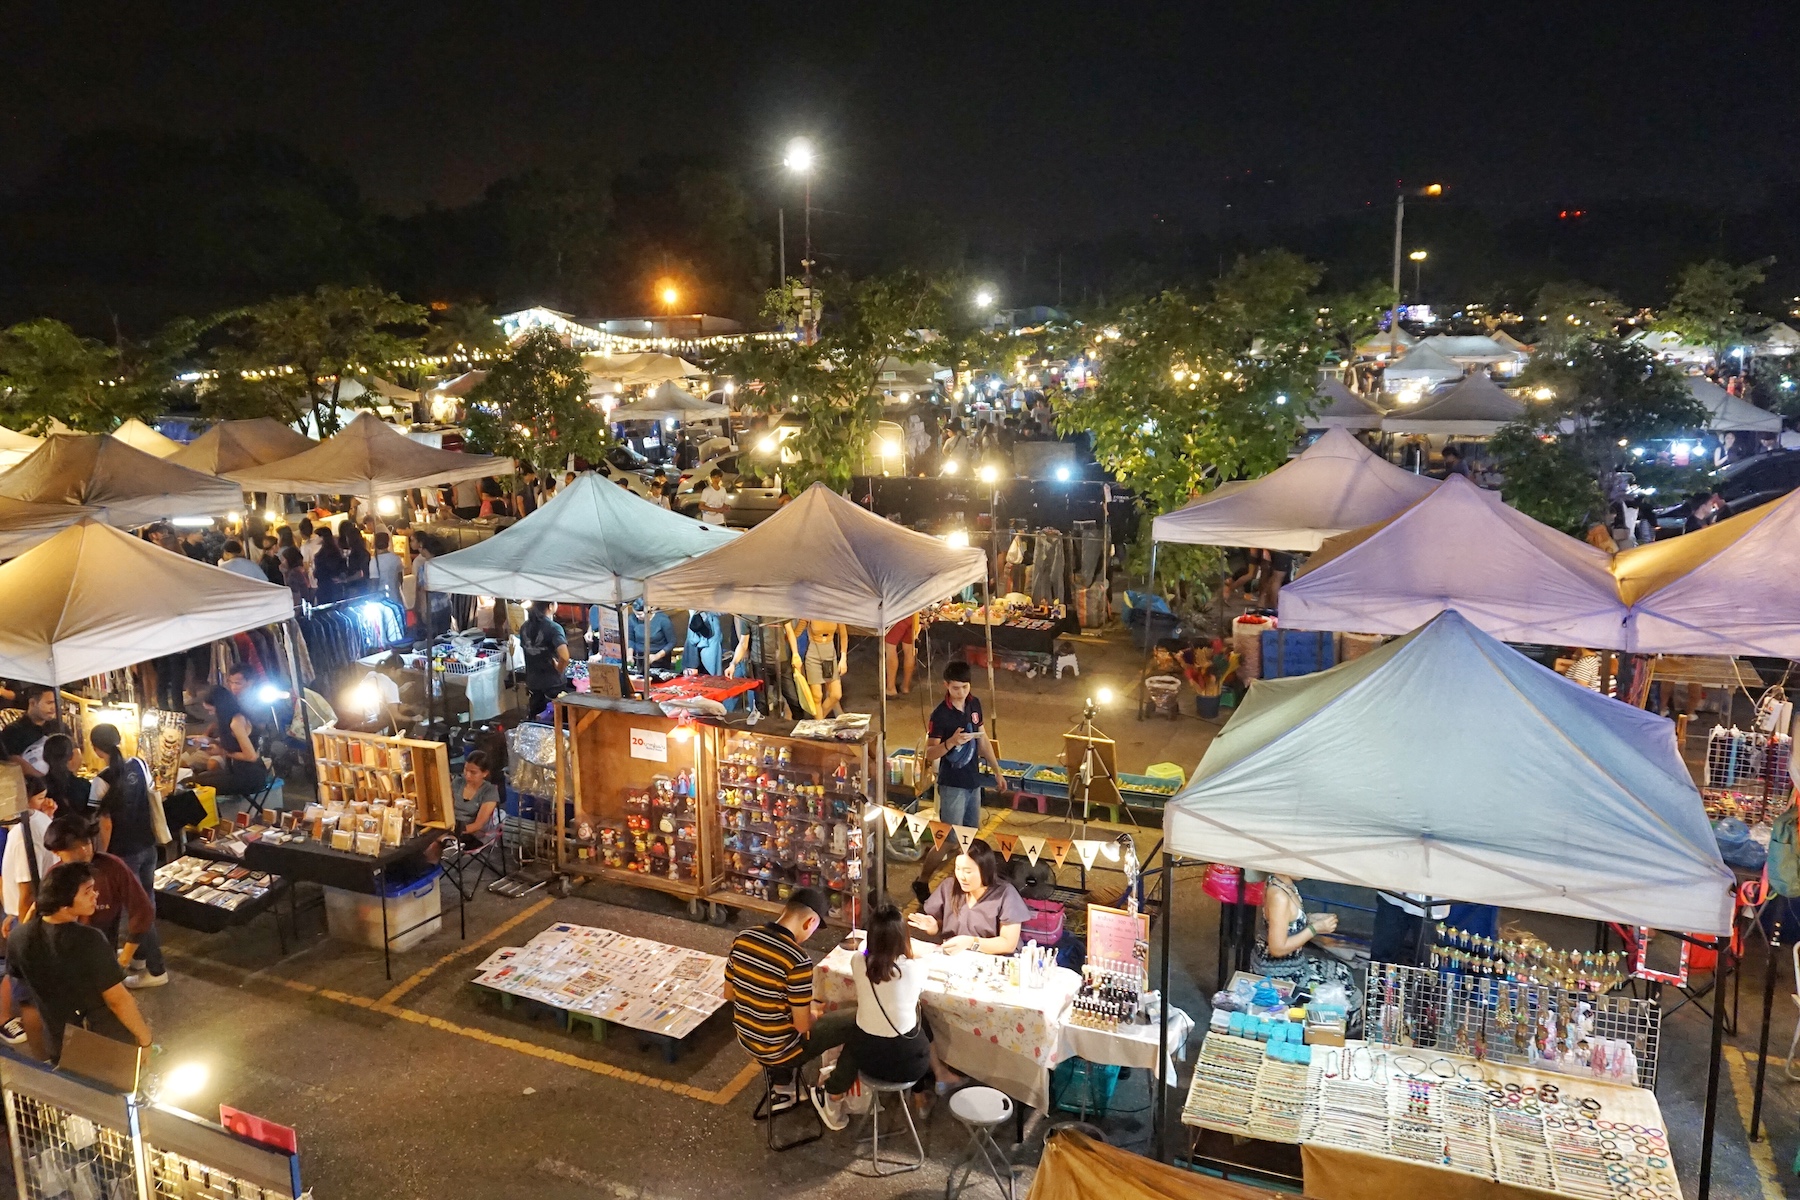 Planning a visit to Chatuchak? Go to JJ Green Instead